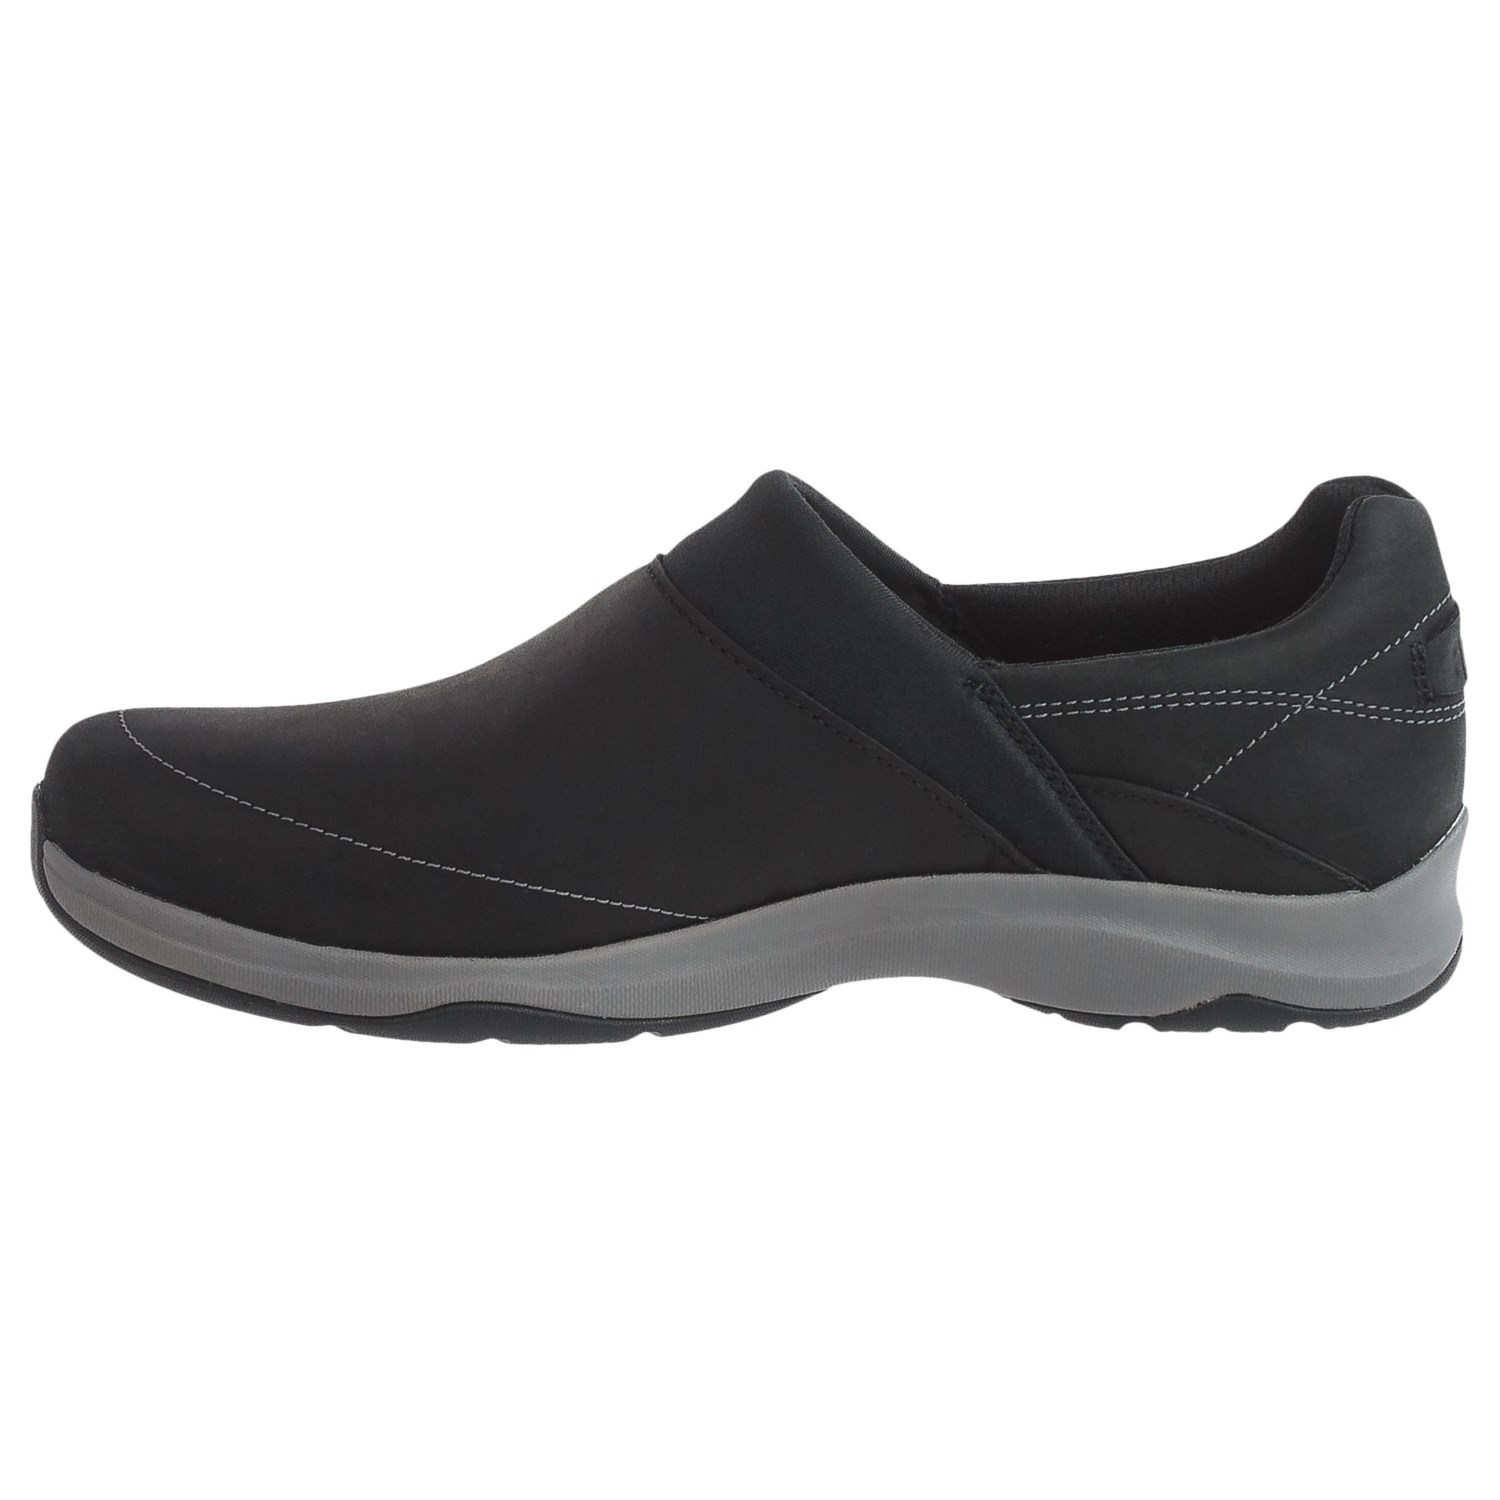 Ahnu Taraval Leather Shoes (For Women) - Save 54%